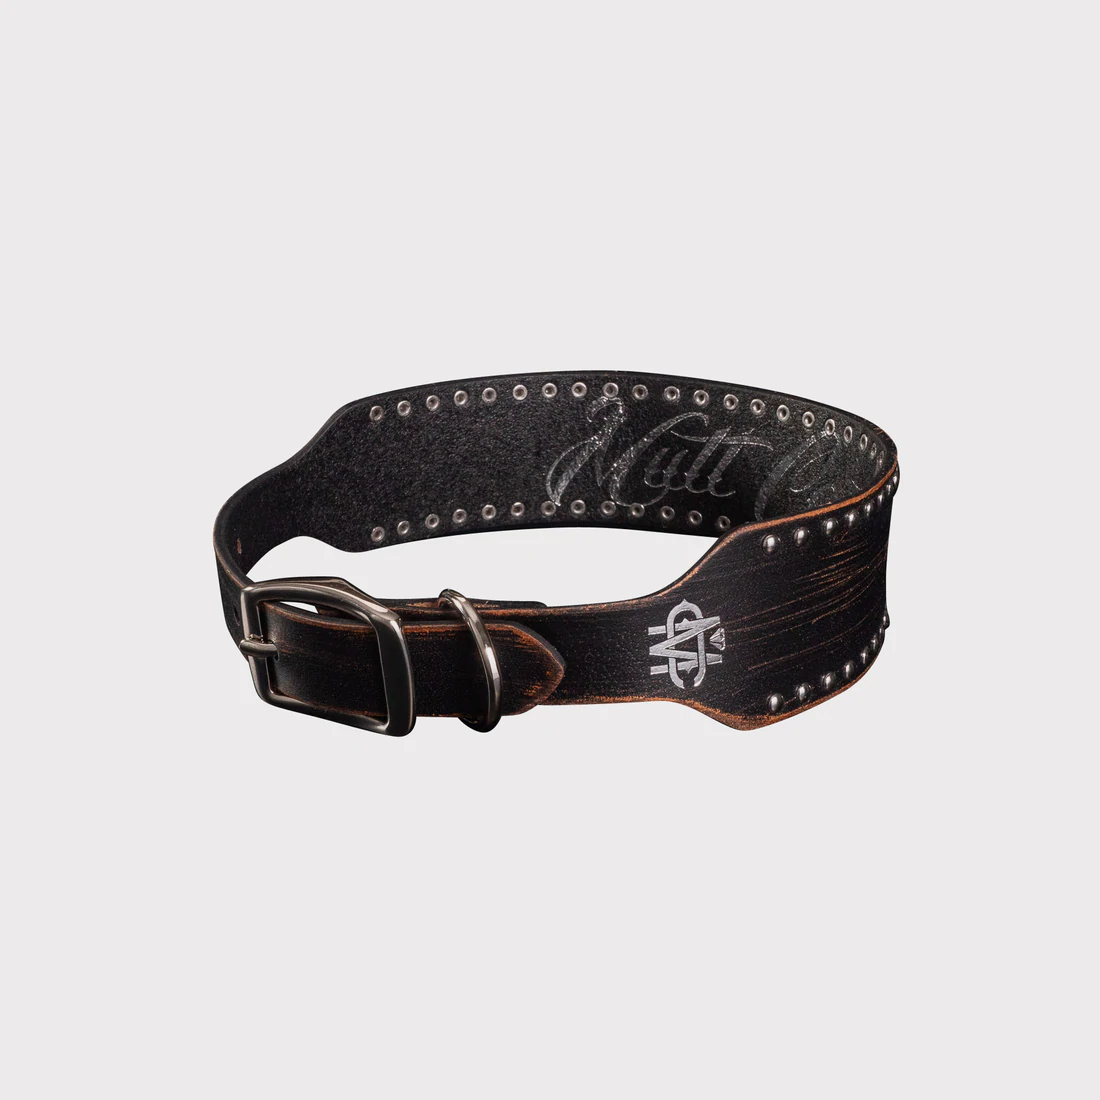 Mutt Couture Distressed Leather Dog Collar With Silver Nailheads